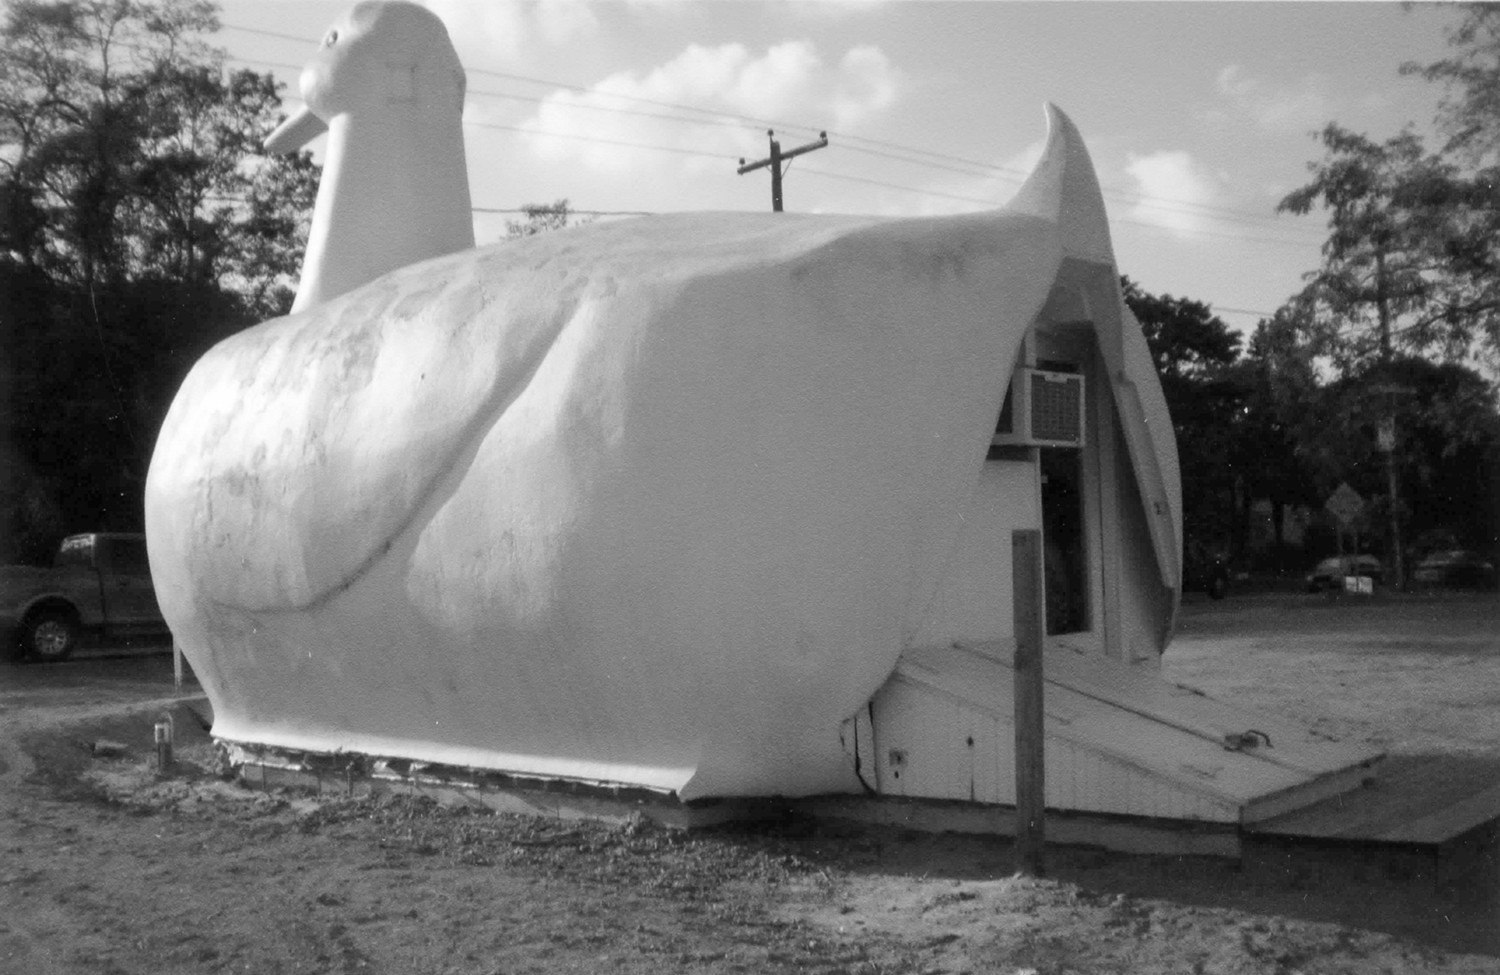 The Big Duck, Southampton New York South side and rear view of Big Duck, looking northwest towards Flanders Rd (2007)